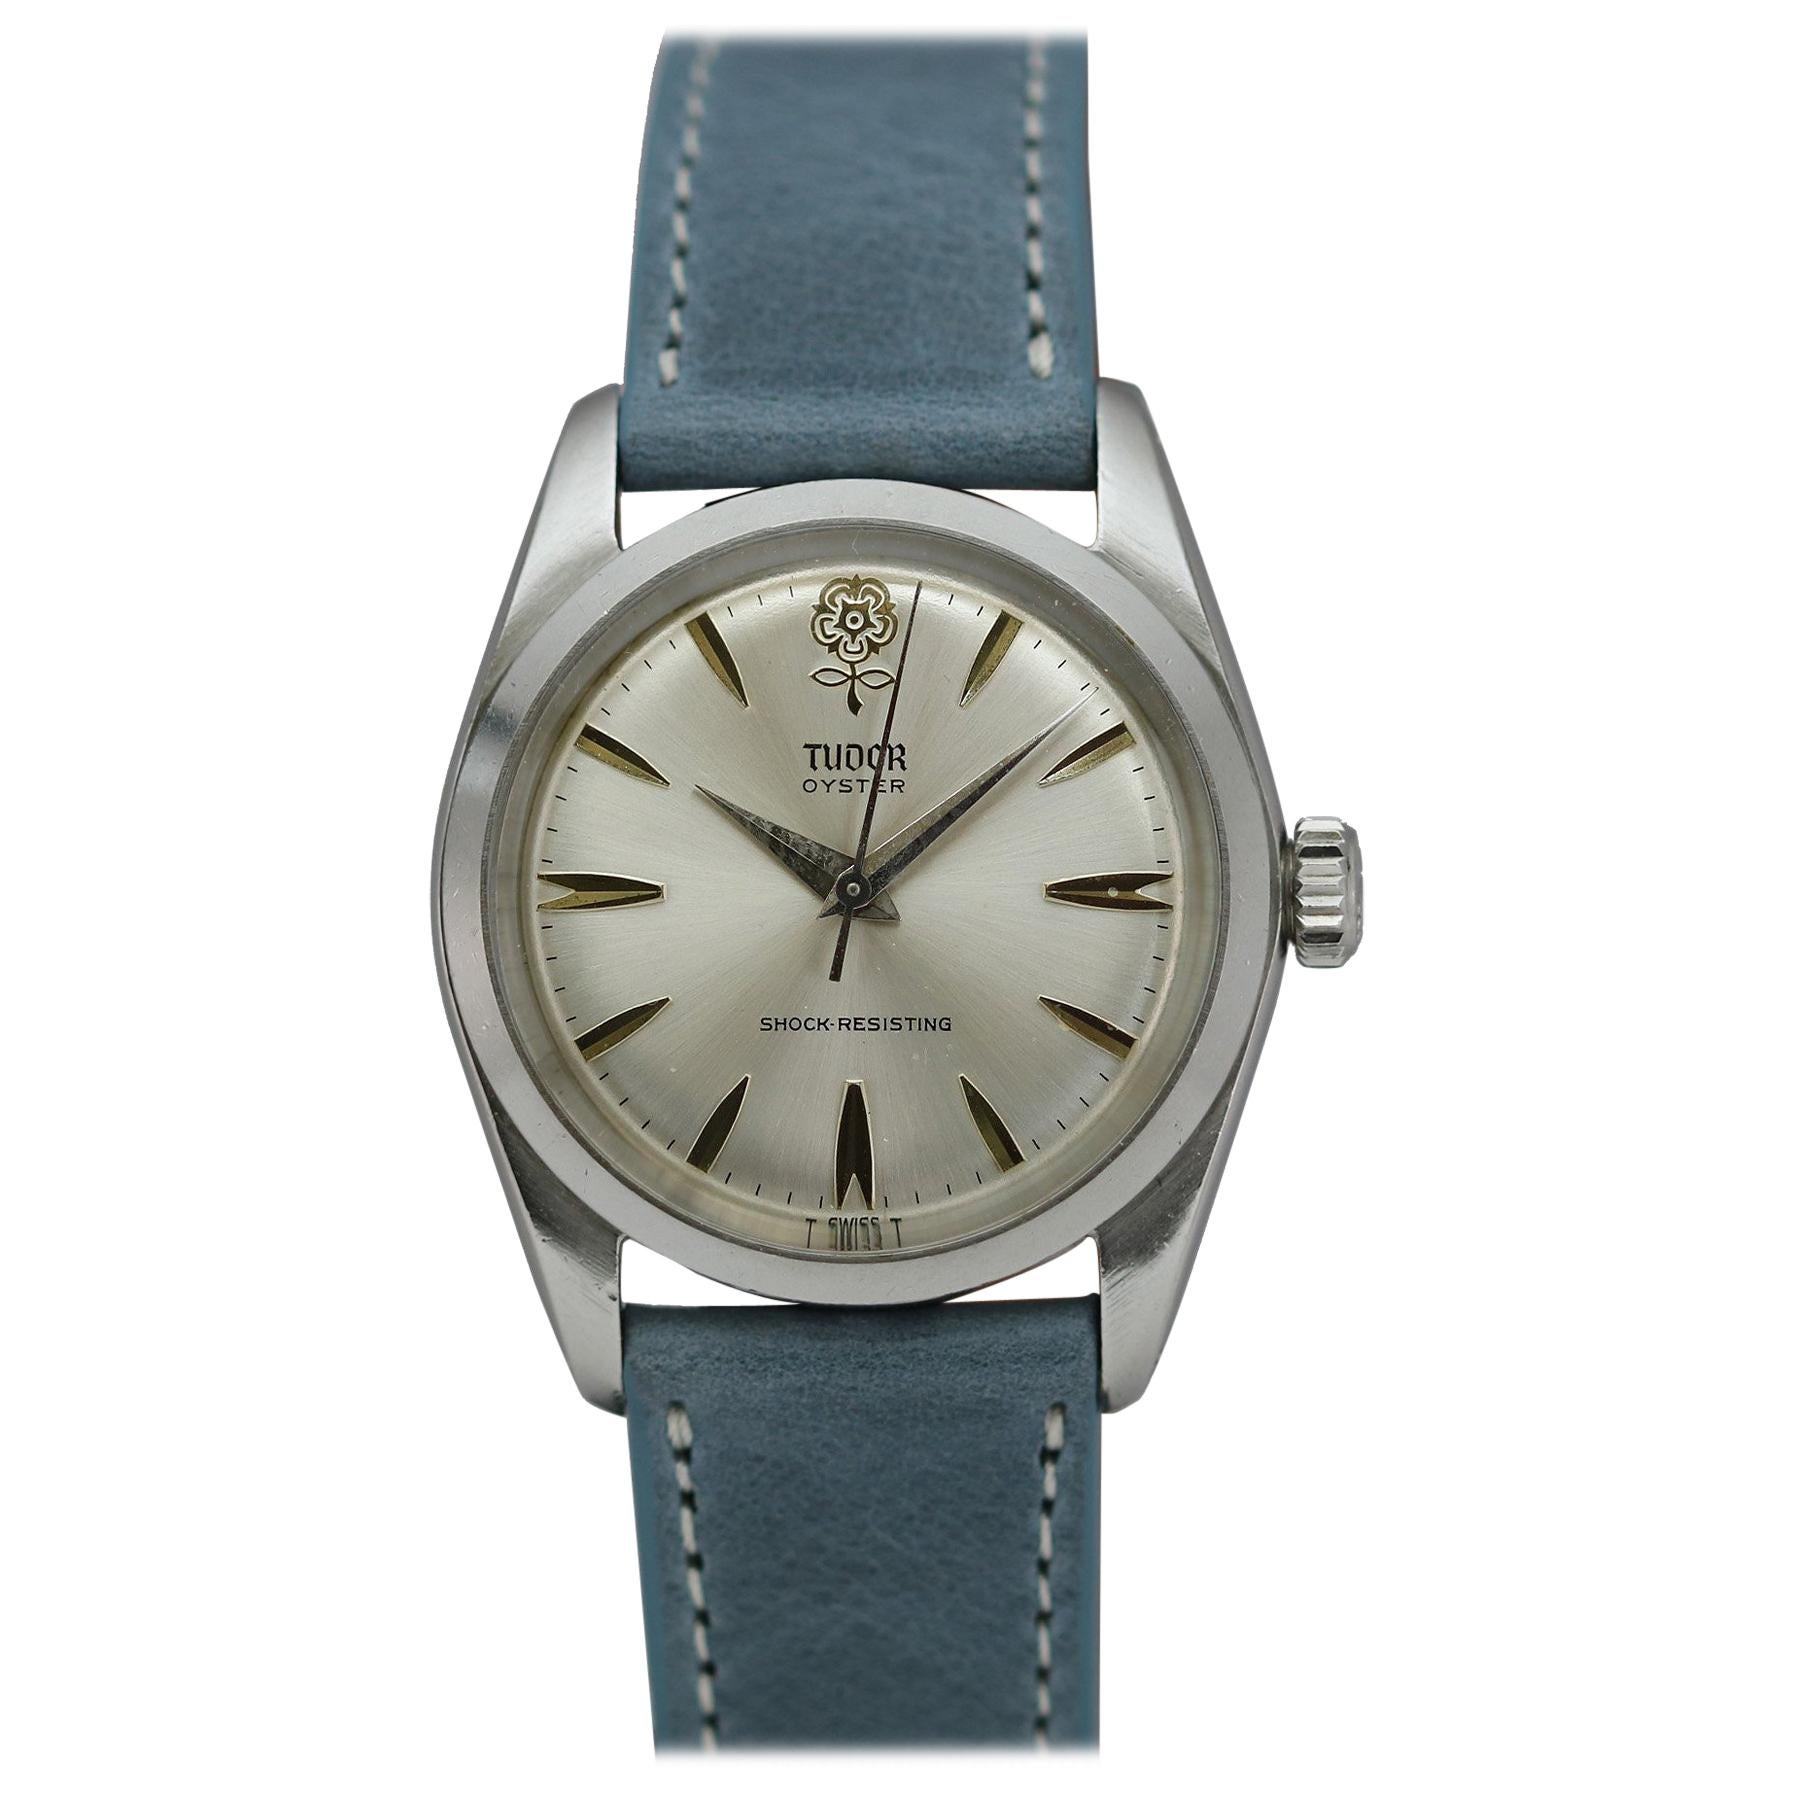 Tudor Stainless Steel Oyster Shock Resisting Ref 7934 Wristwatch, circa 1965